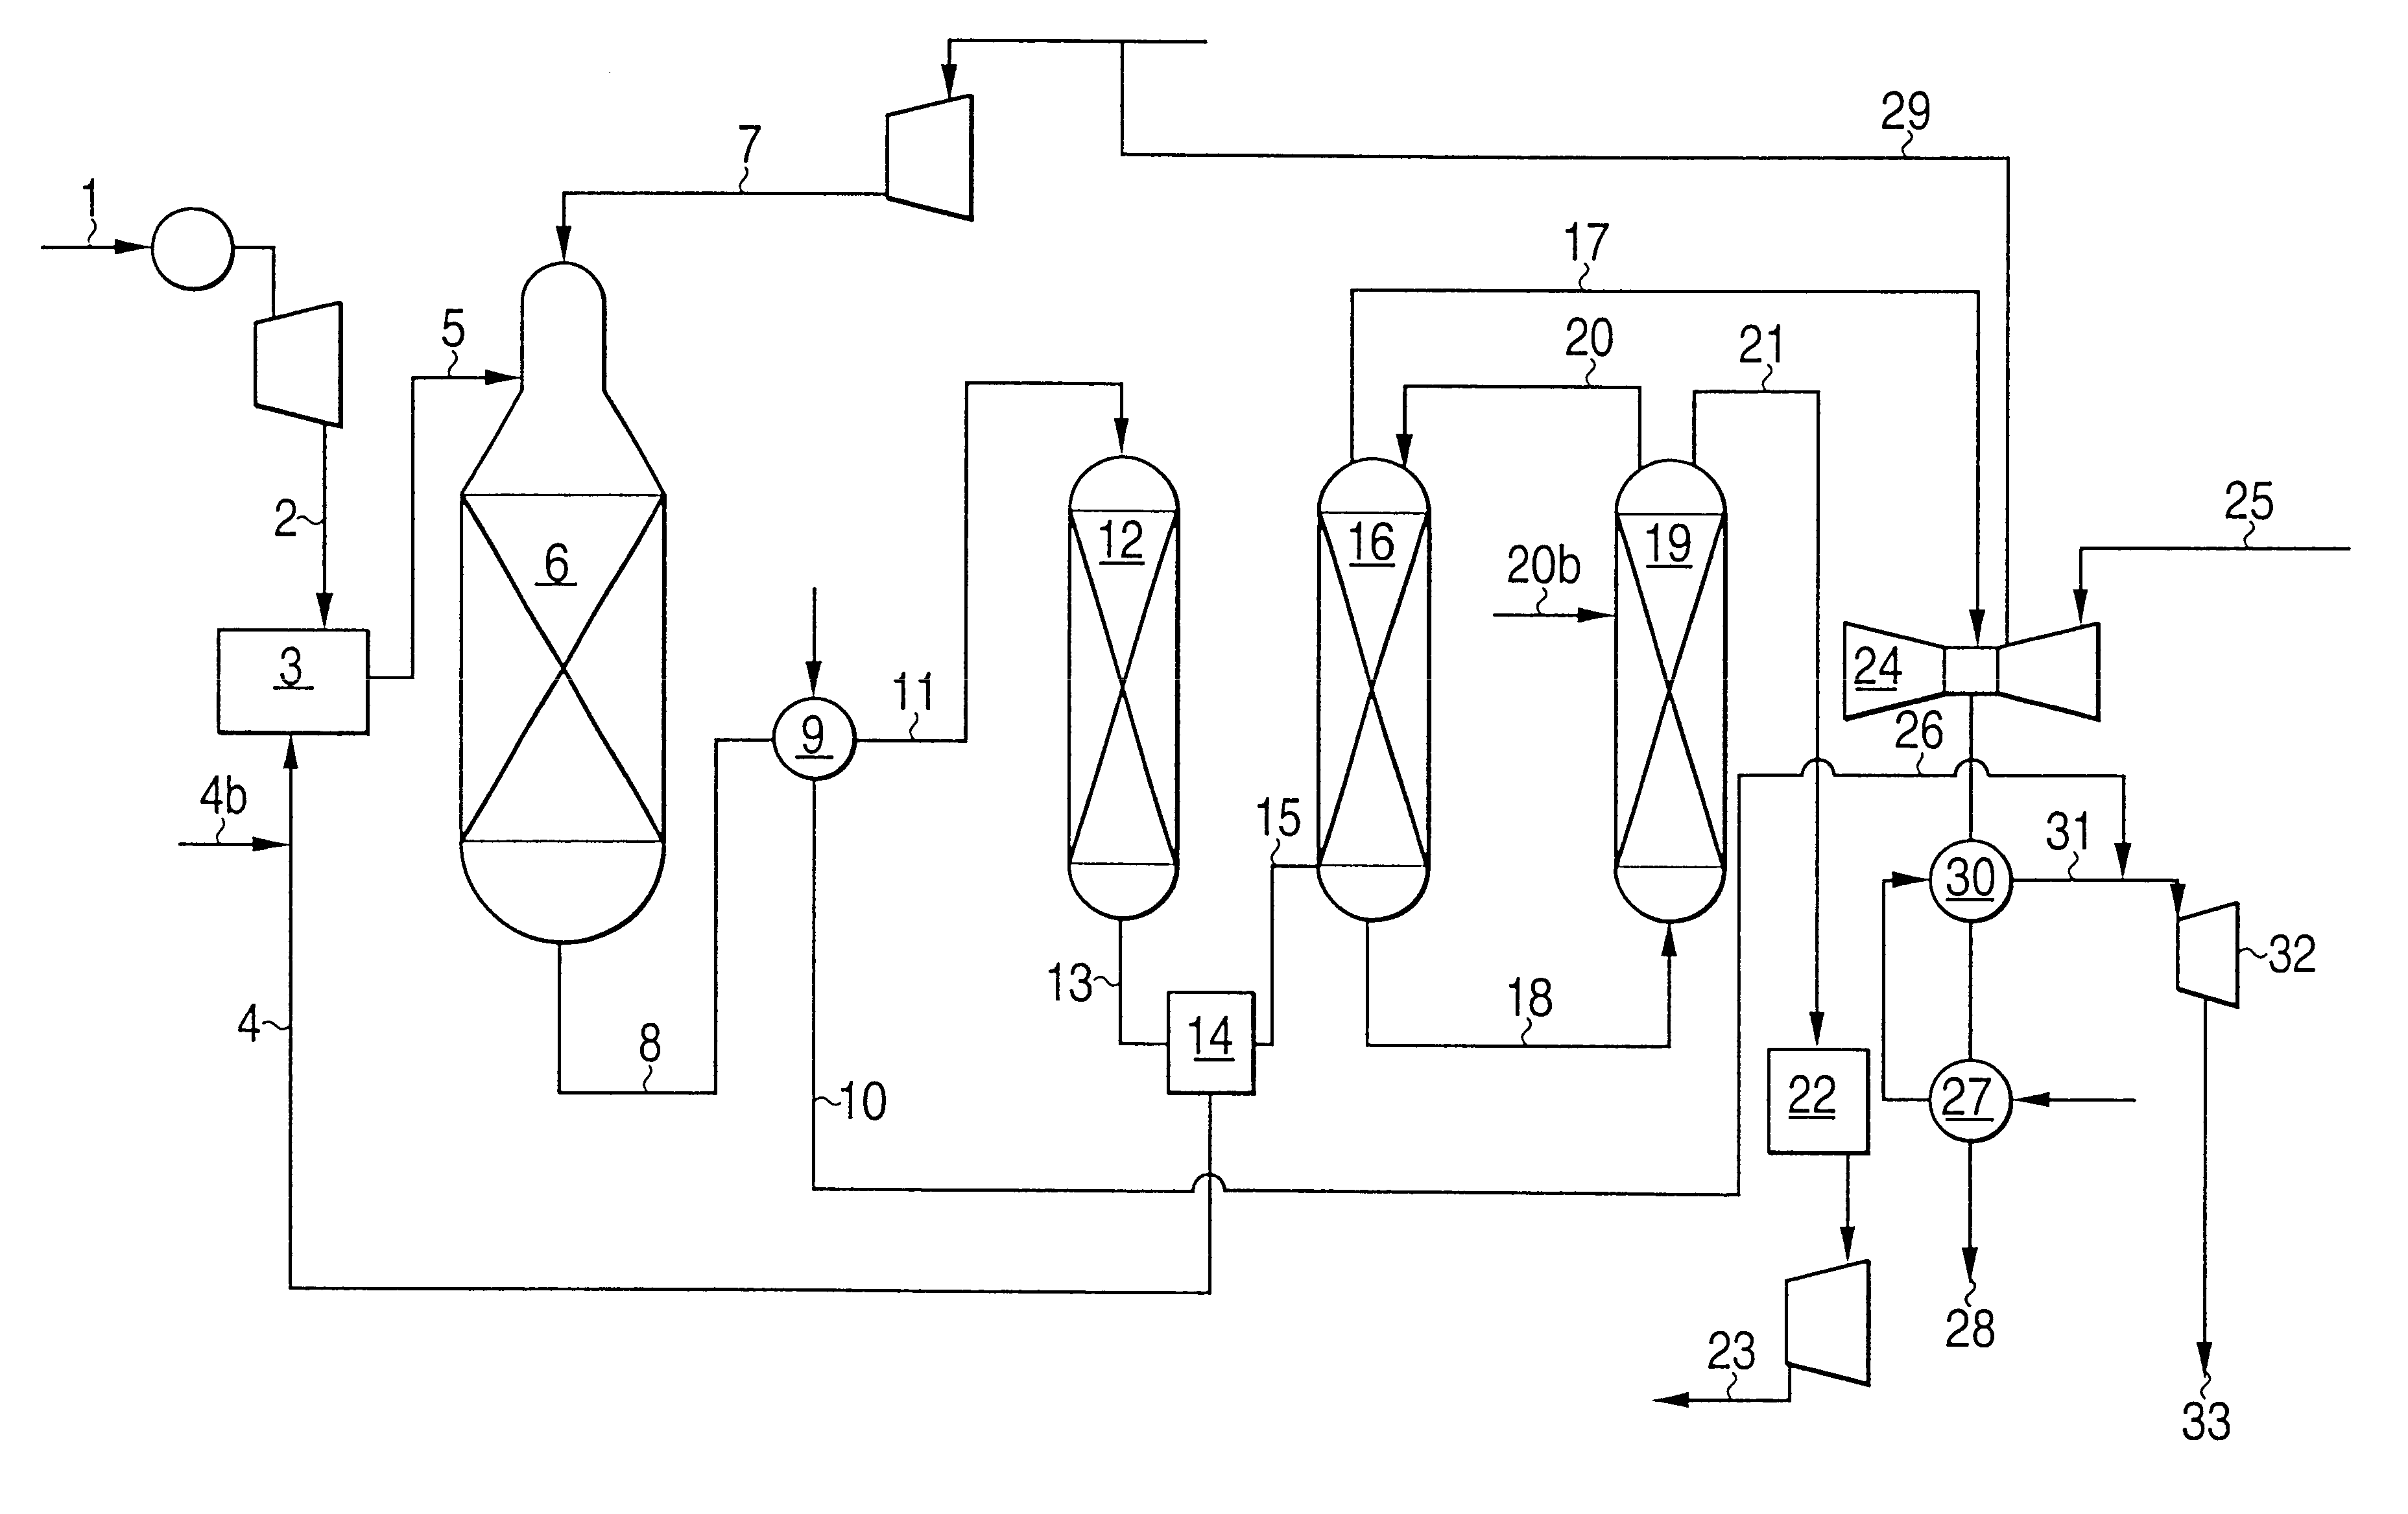 Process for generating electric energy, steam and carbon dioxide from hydrocarbon feedstock